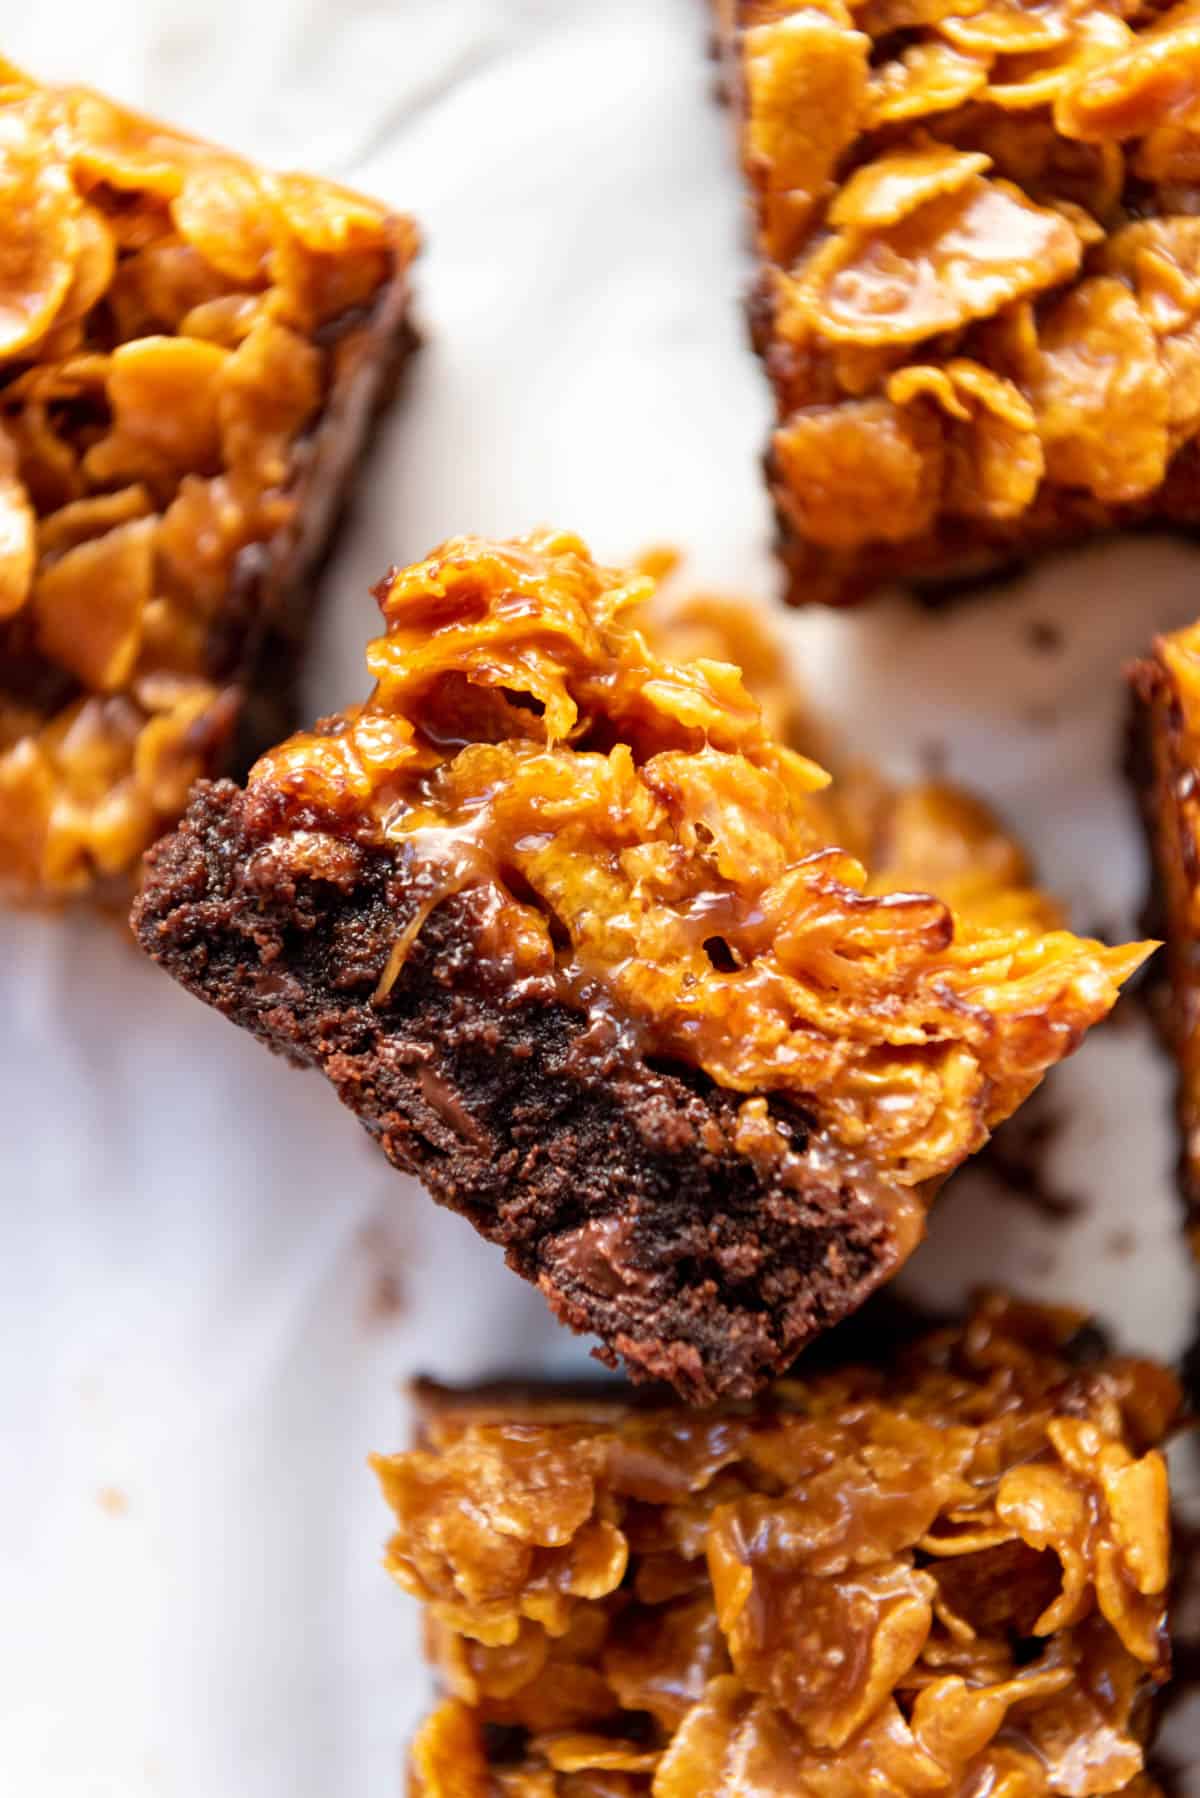 A fudgy brownie with a caramel cornflake layer on top laying on its side.